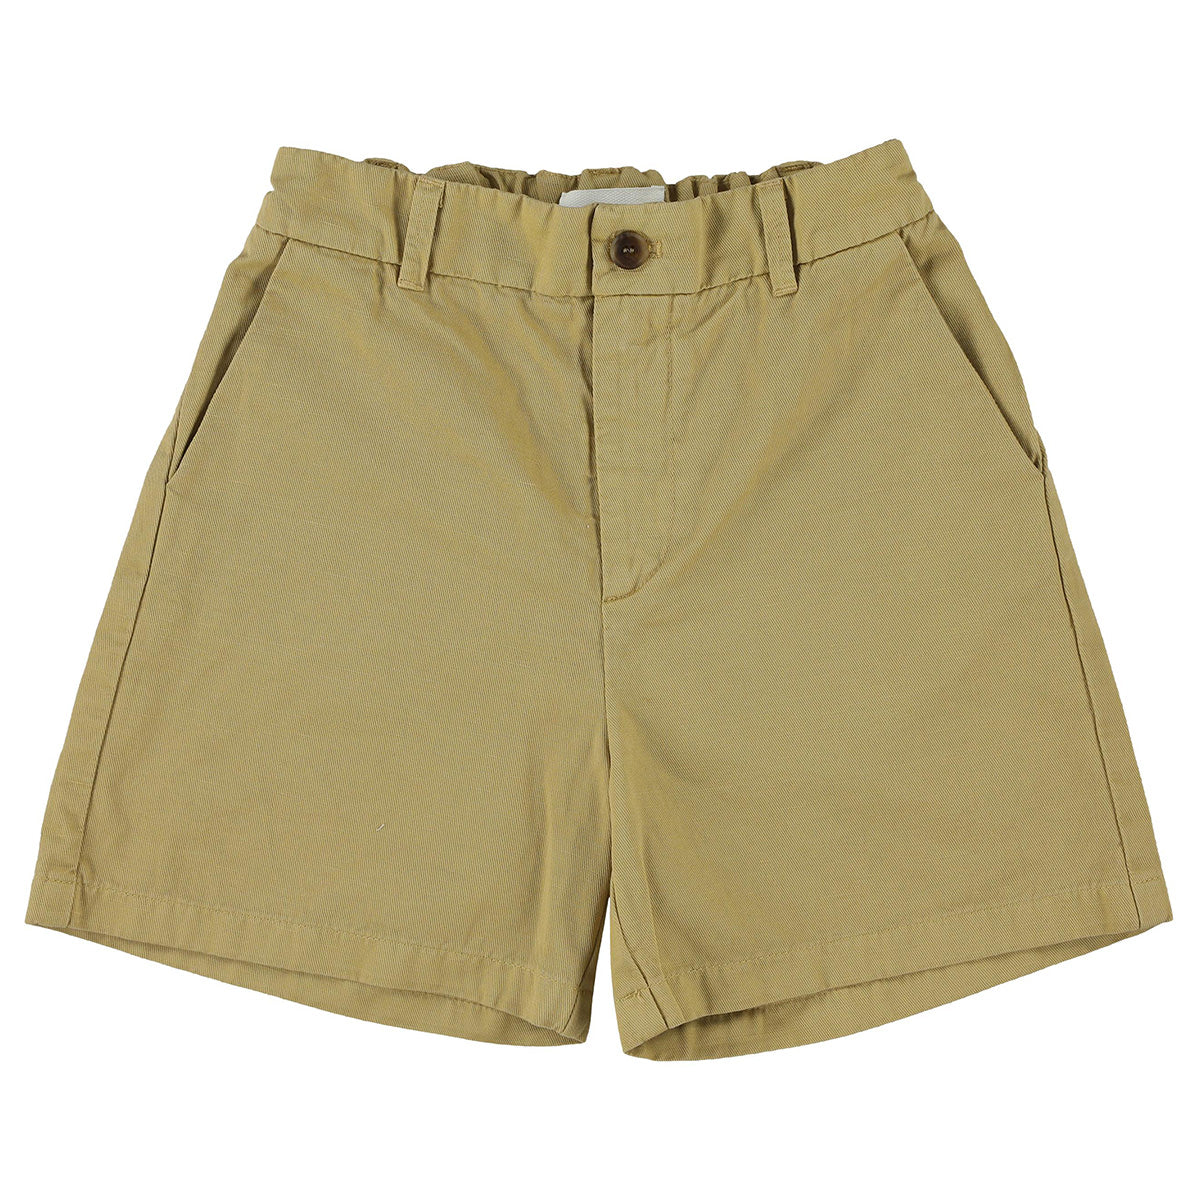 The Unity Shorts from Morley. Classic style shorts, Elasticated back waist, Side pockets. 